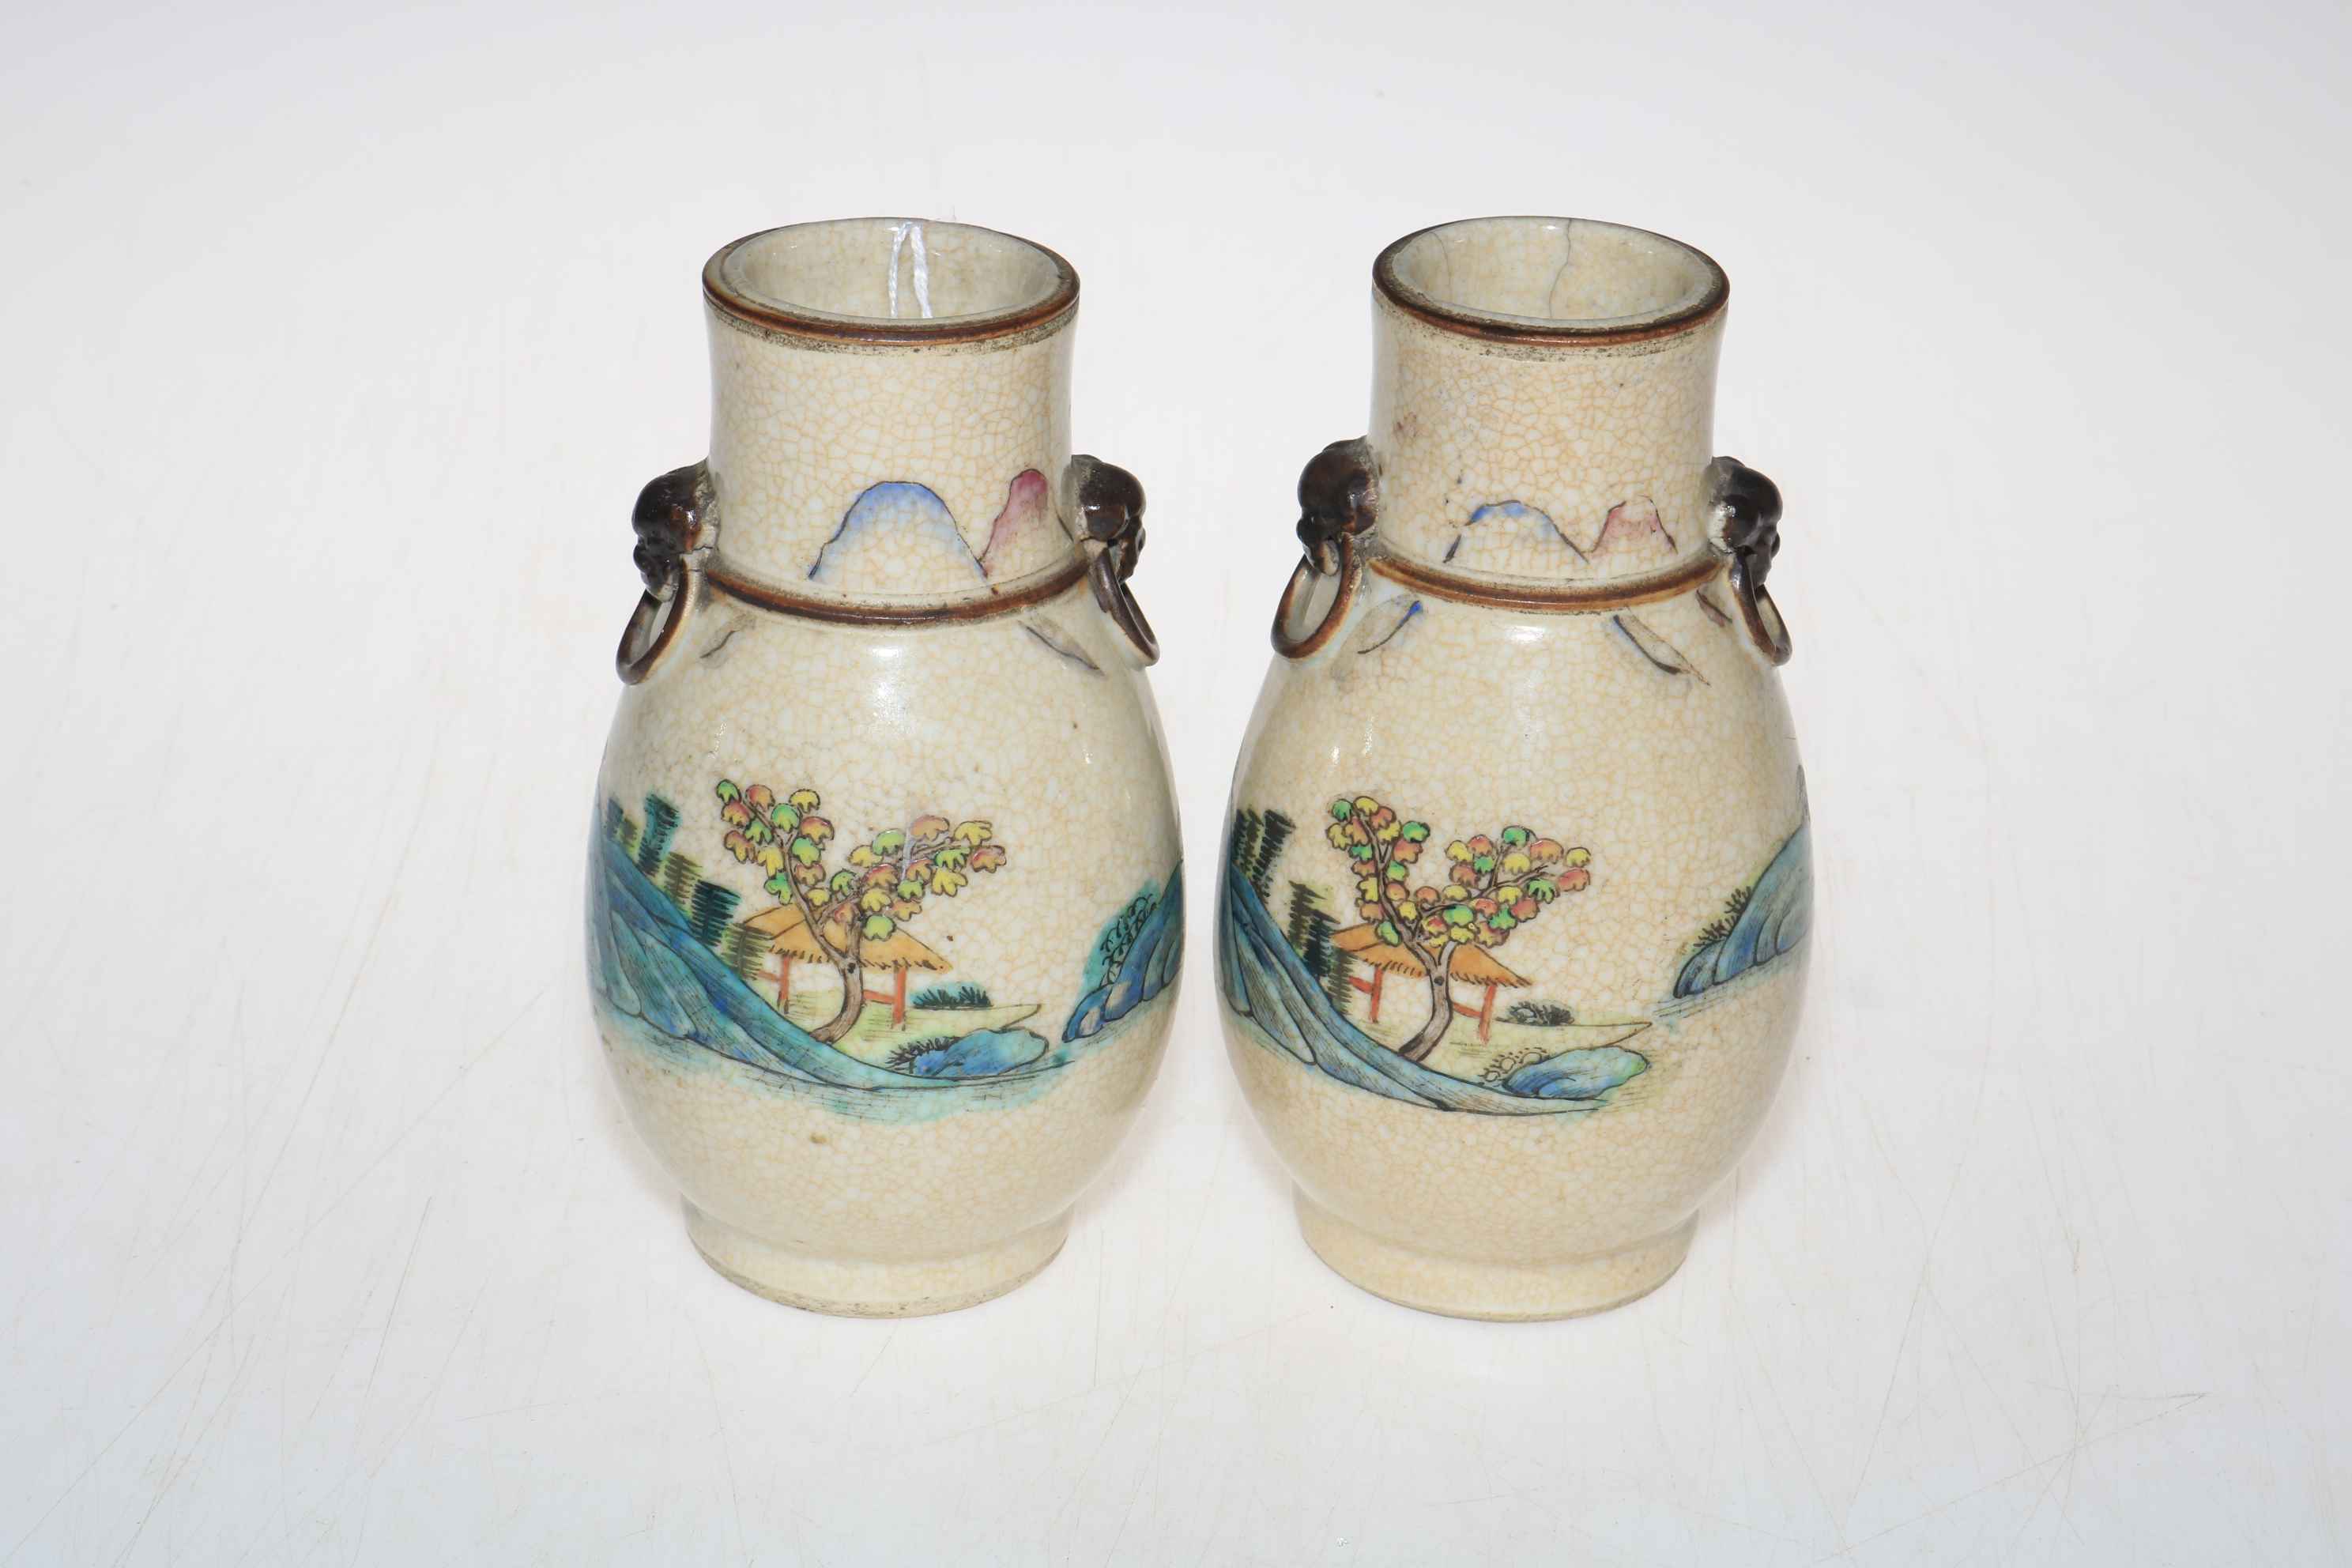 Pair of Chinese crackle glazed vases, decorated with boating scenes. - Image 2 of 3